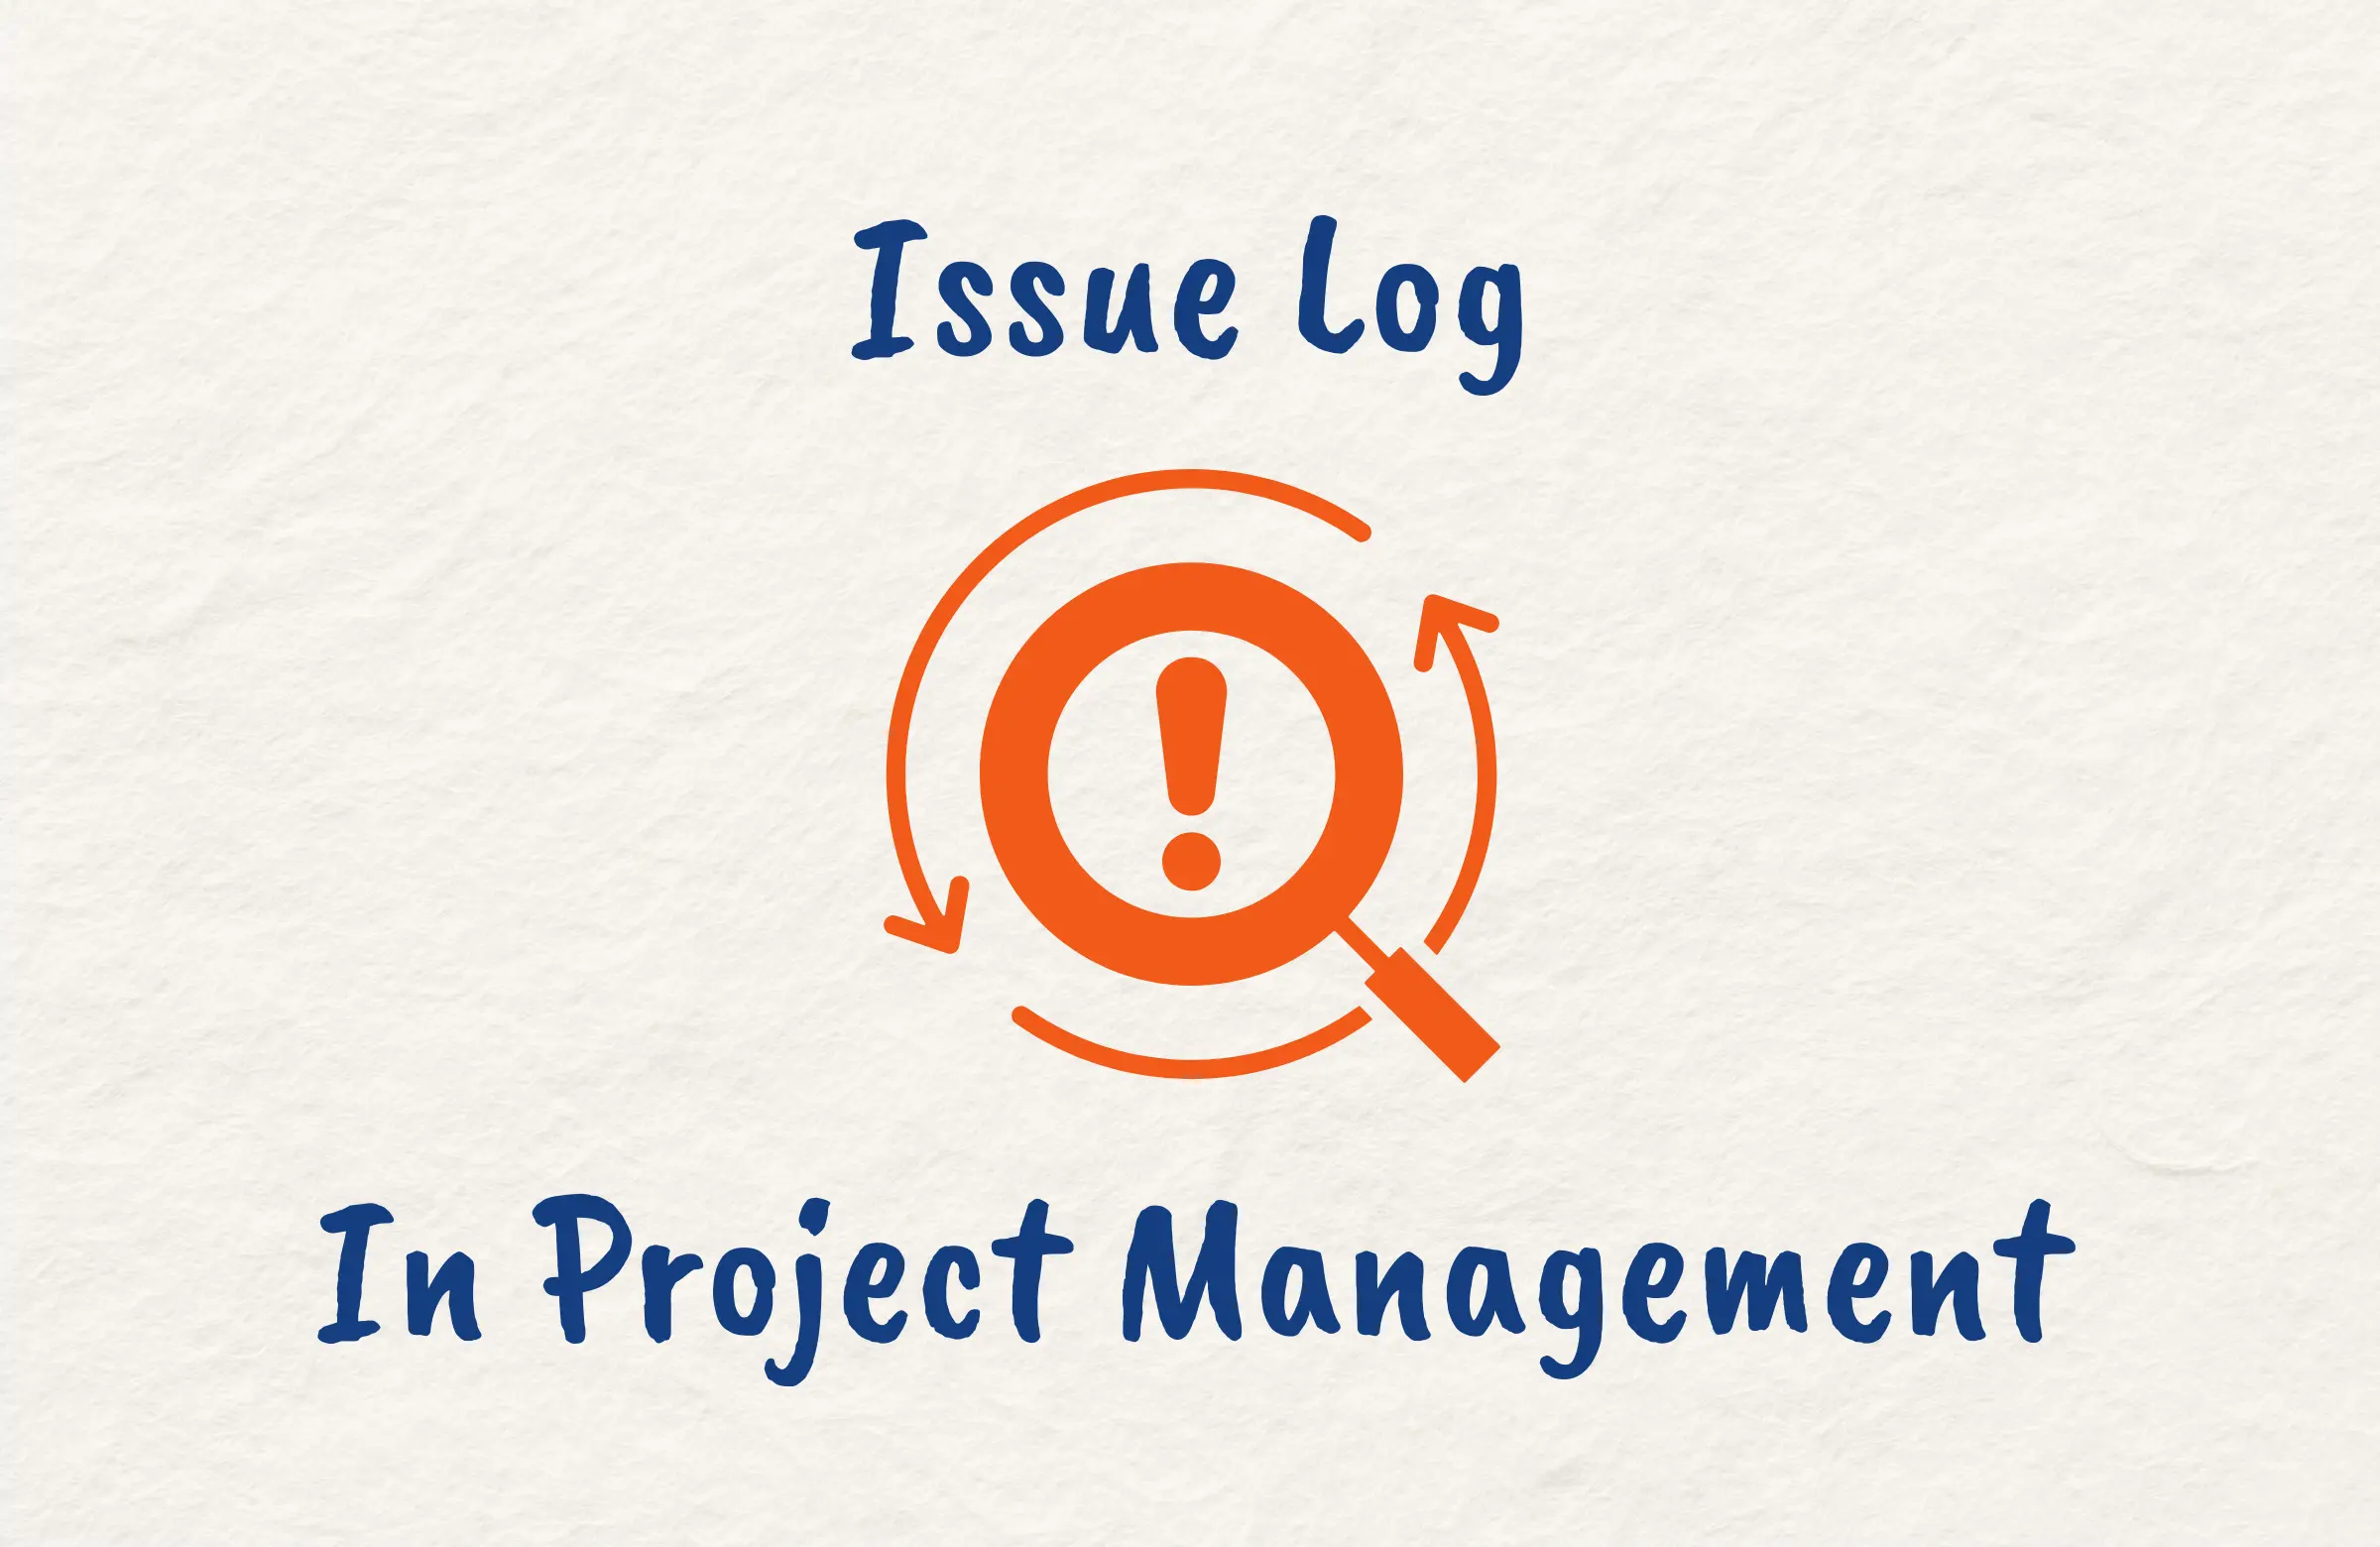 What is an Issue Log in Project Management